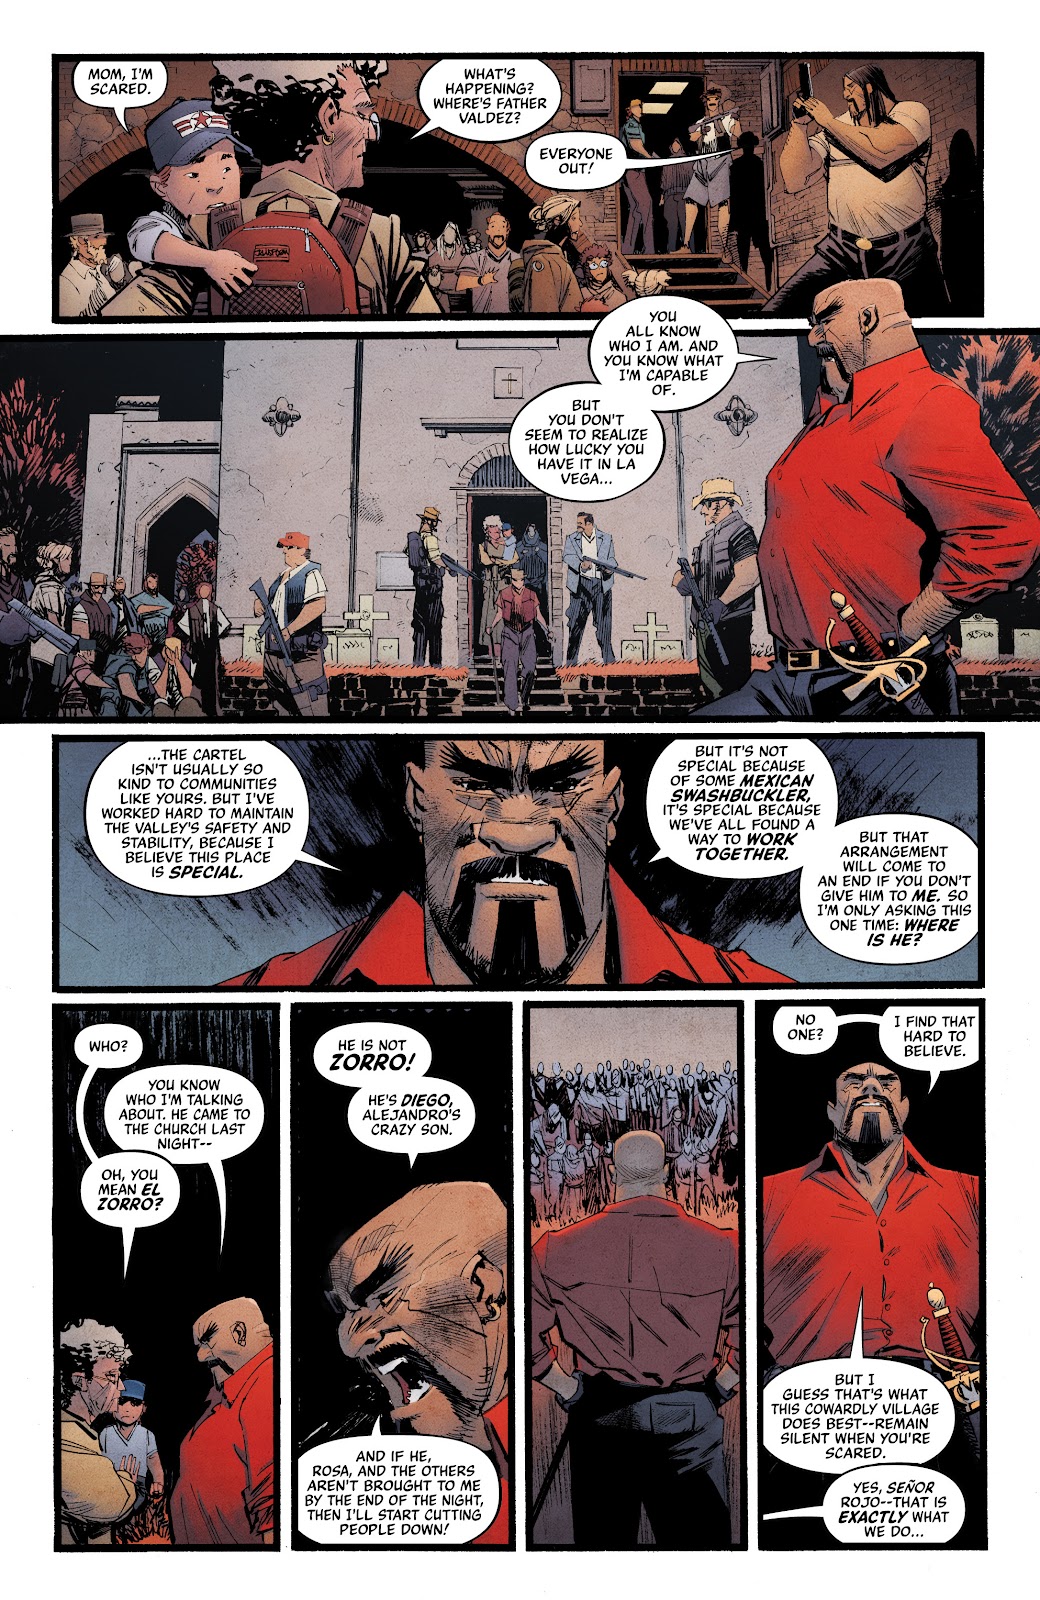 Zorro: Man of the Dead issue 3 - Page 9